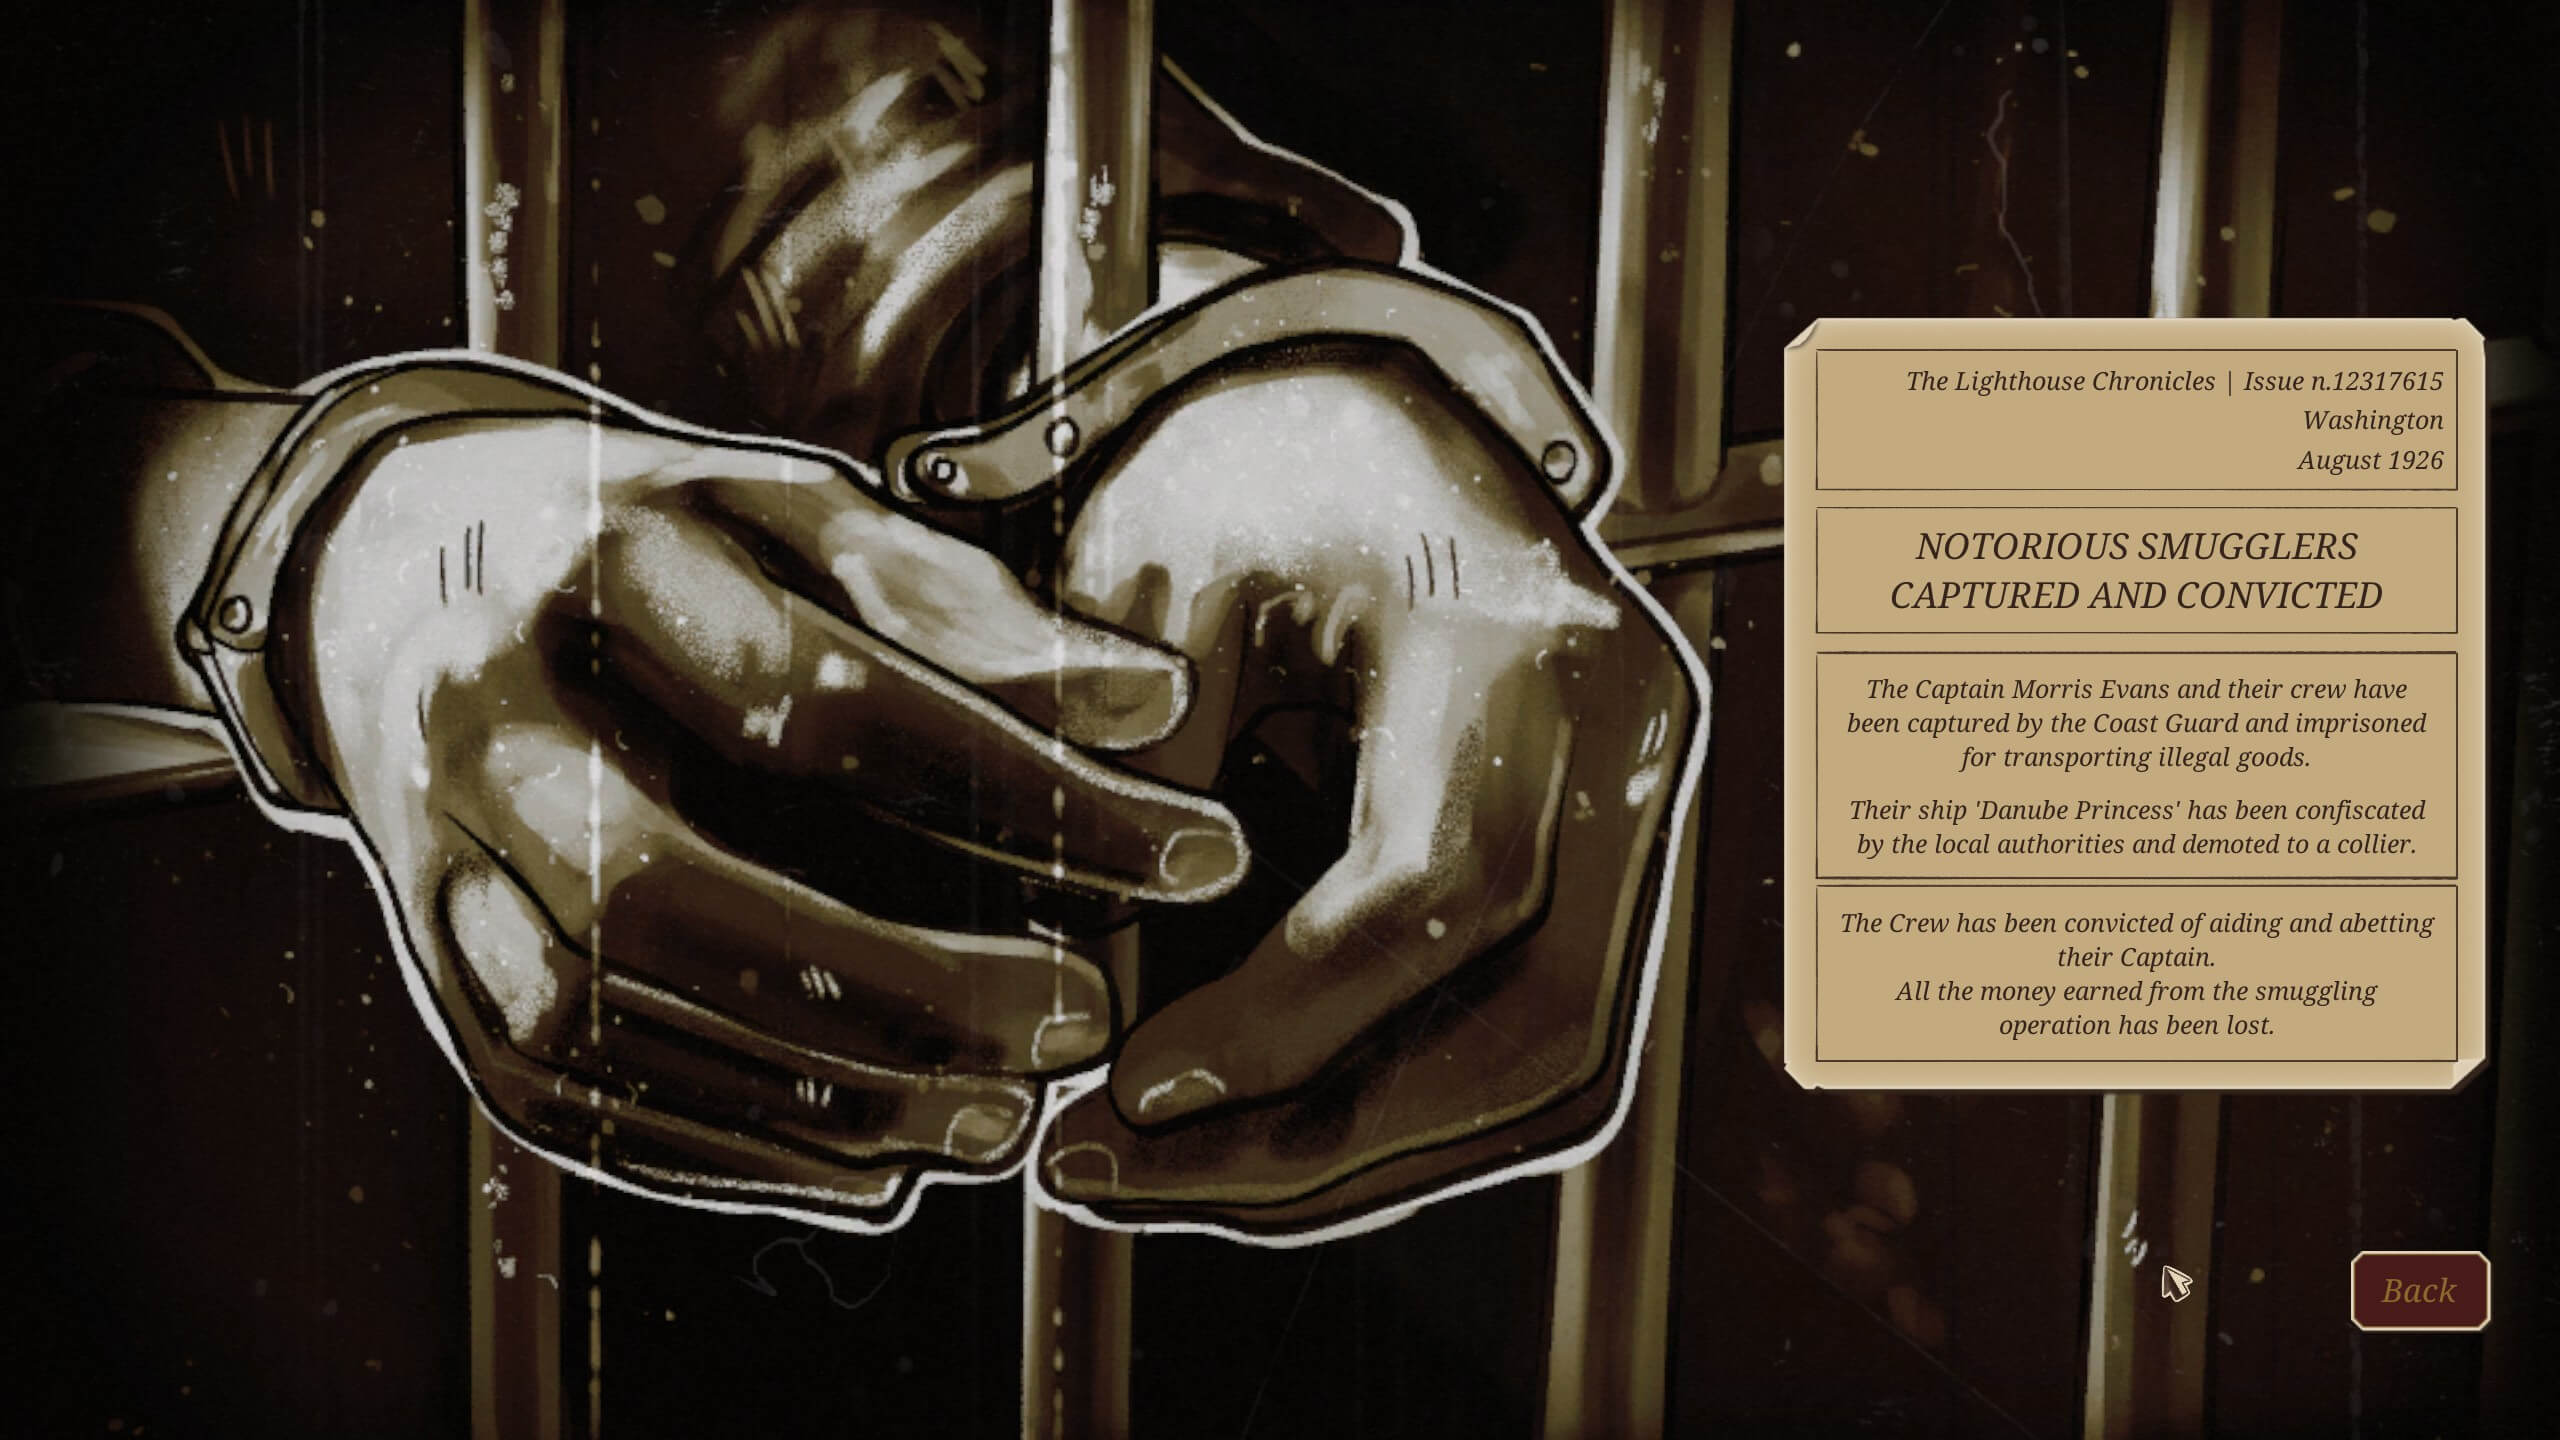 game screen where you have reached game over. this gives you an overview on whats happened to your crew as well as having a large image of hands behind bars